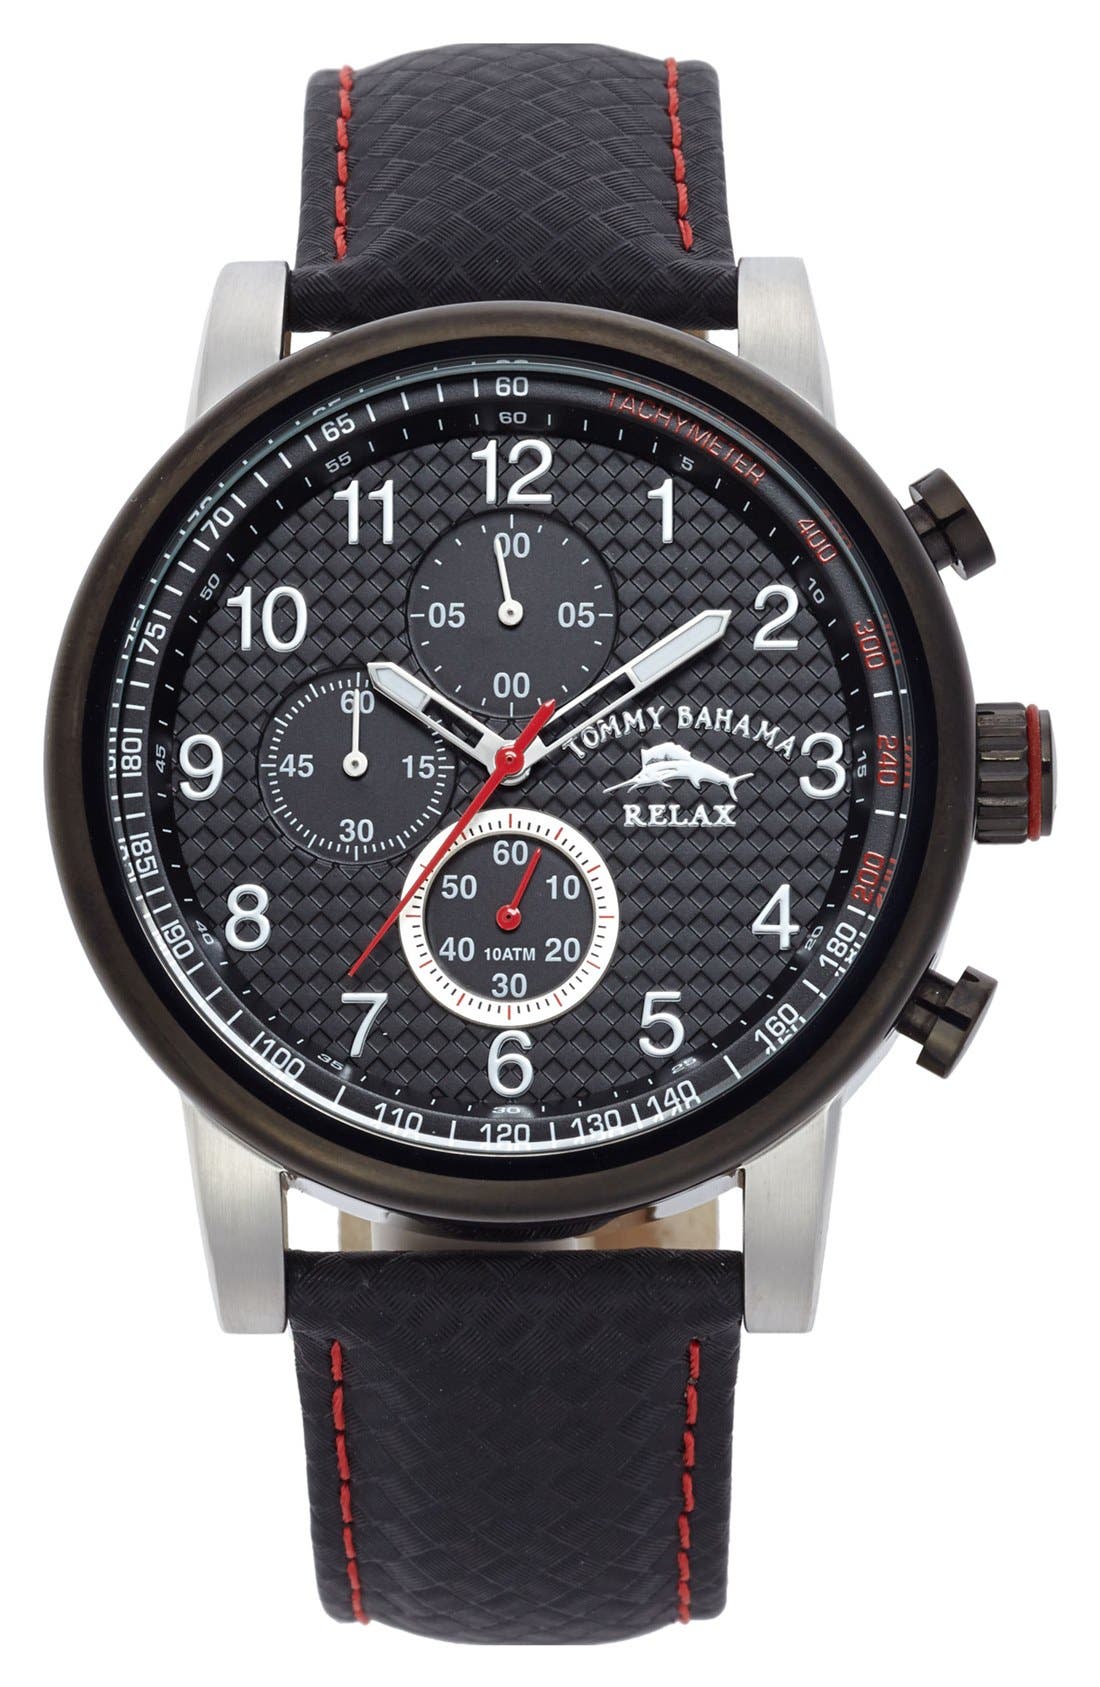 tommy bahama relax watch 10 atm price